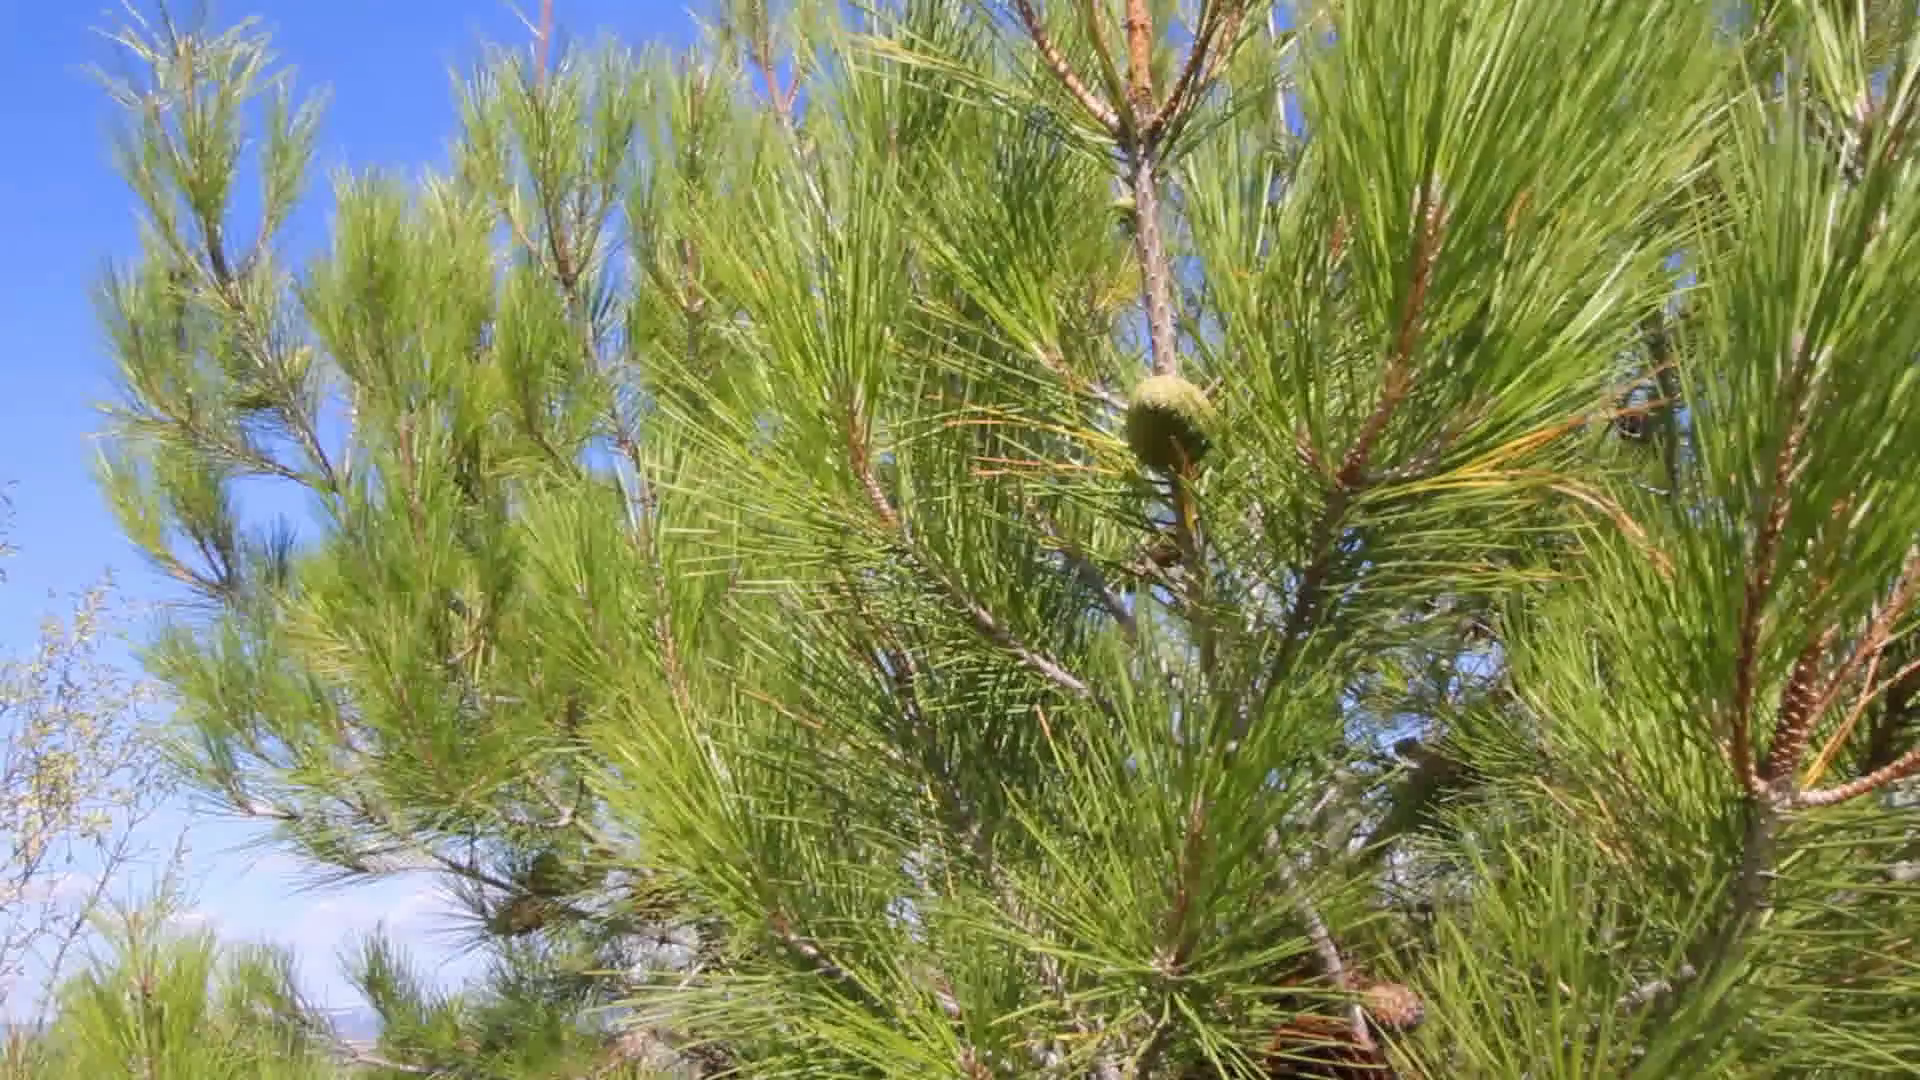 medical conifers. cones green pine trees swaying in the wind. large ...